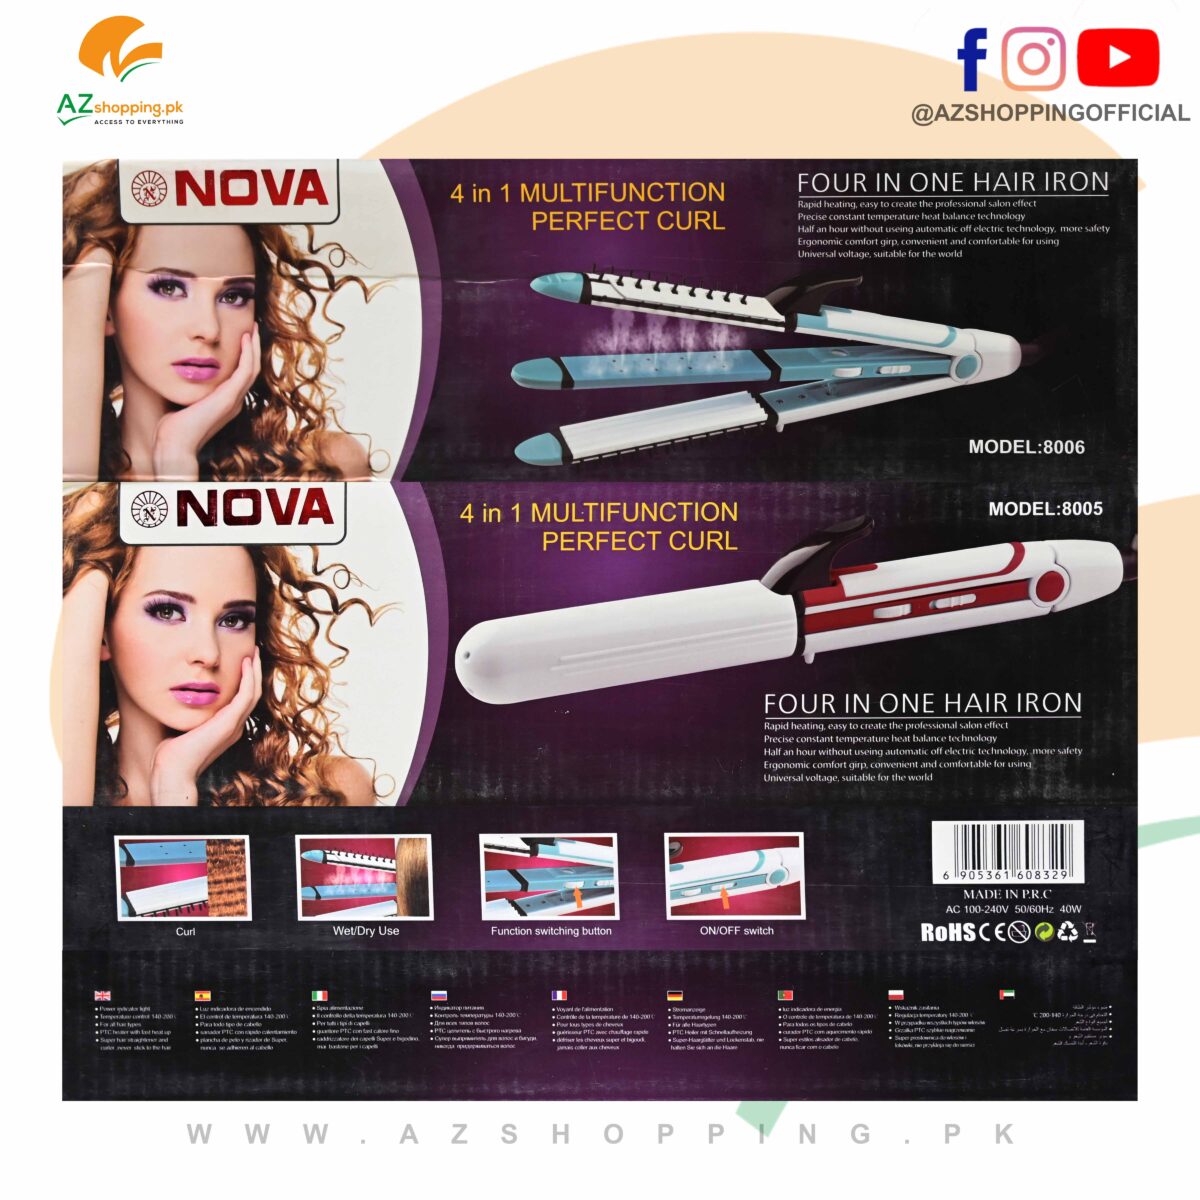 Nova – 4 in 1 Multifunction Perfect Curl 40W For Wet/Dry Steam Spray Use – Model: 8006